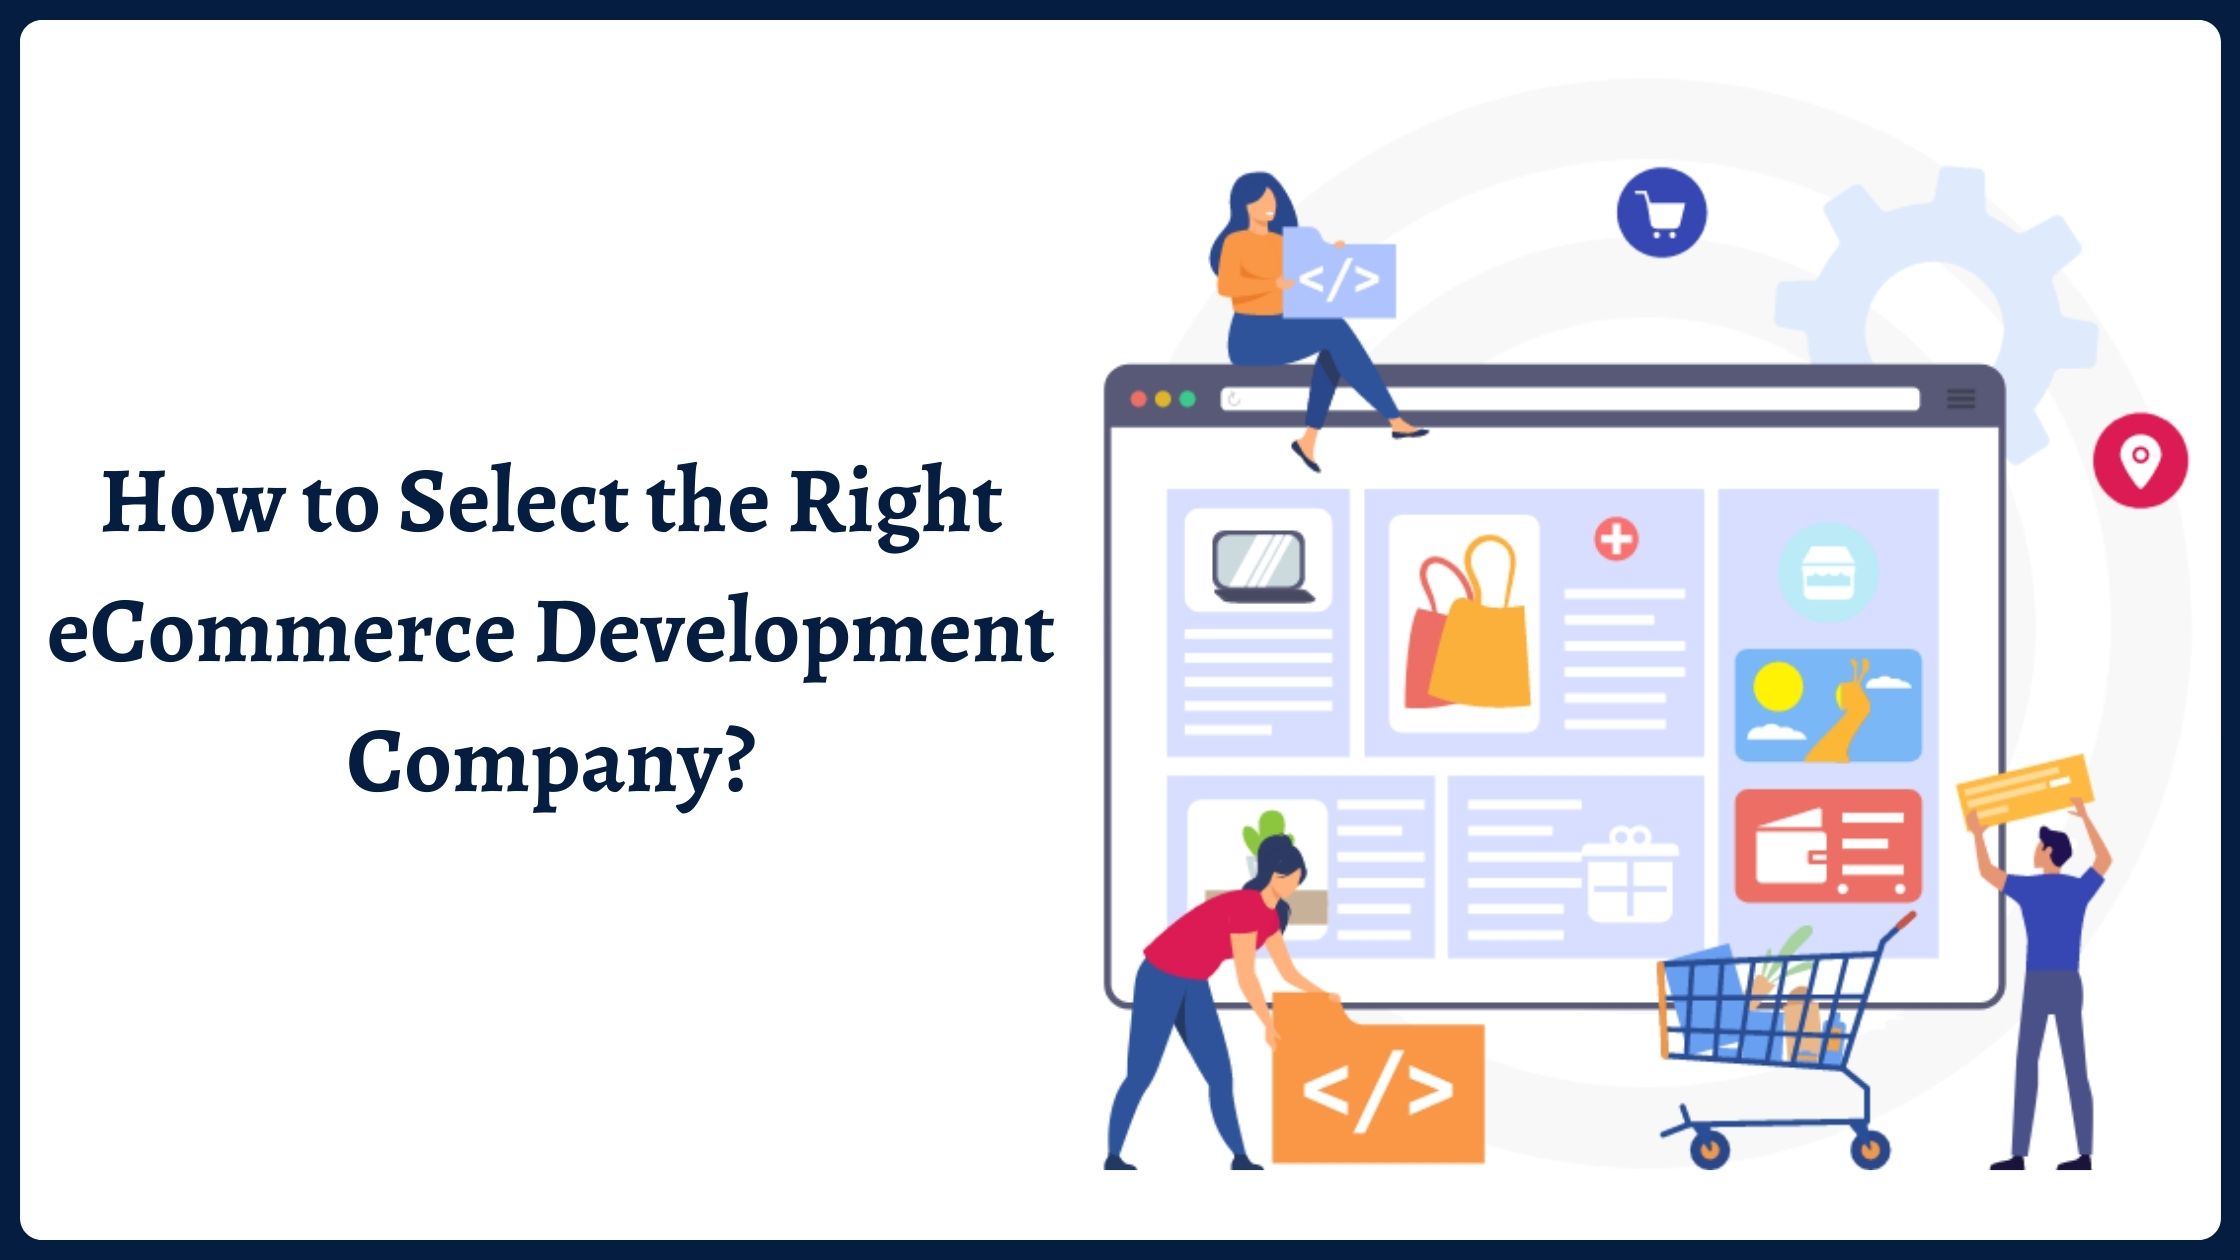 How to Select the Right eCommerce Development Company